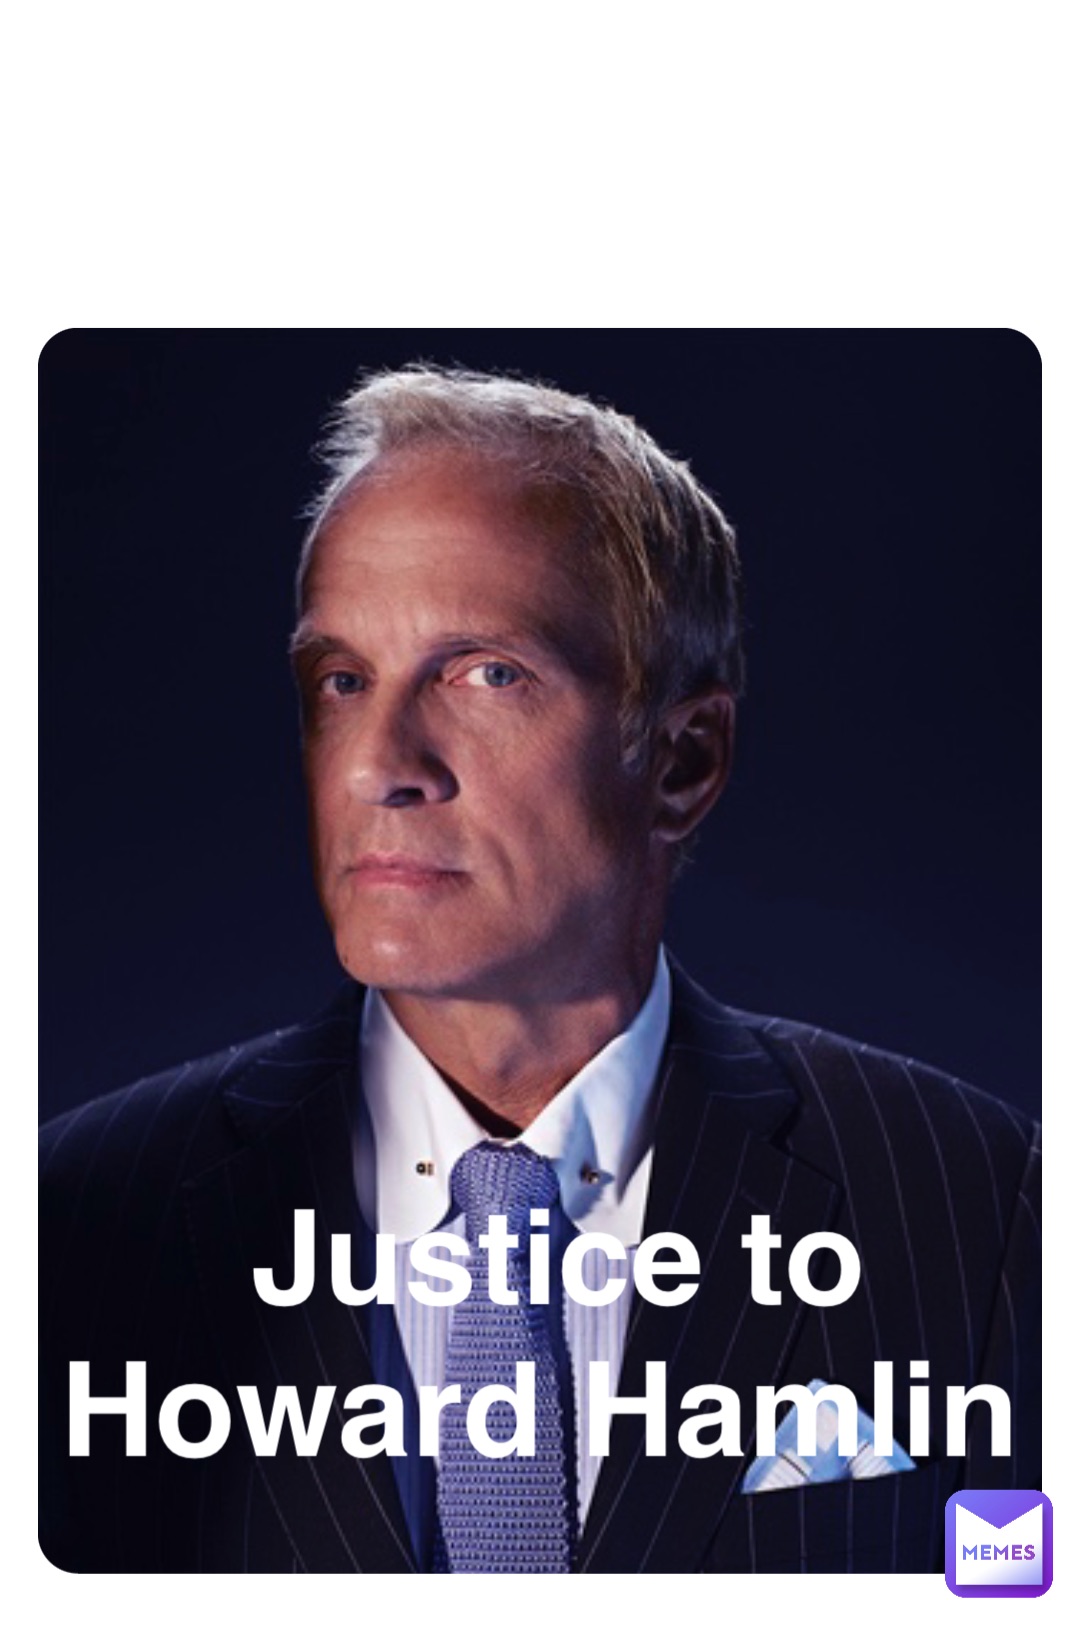 Double tap to edit Justice to 
Howard Hamlin